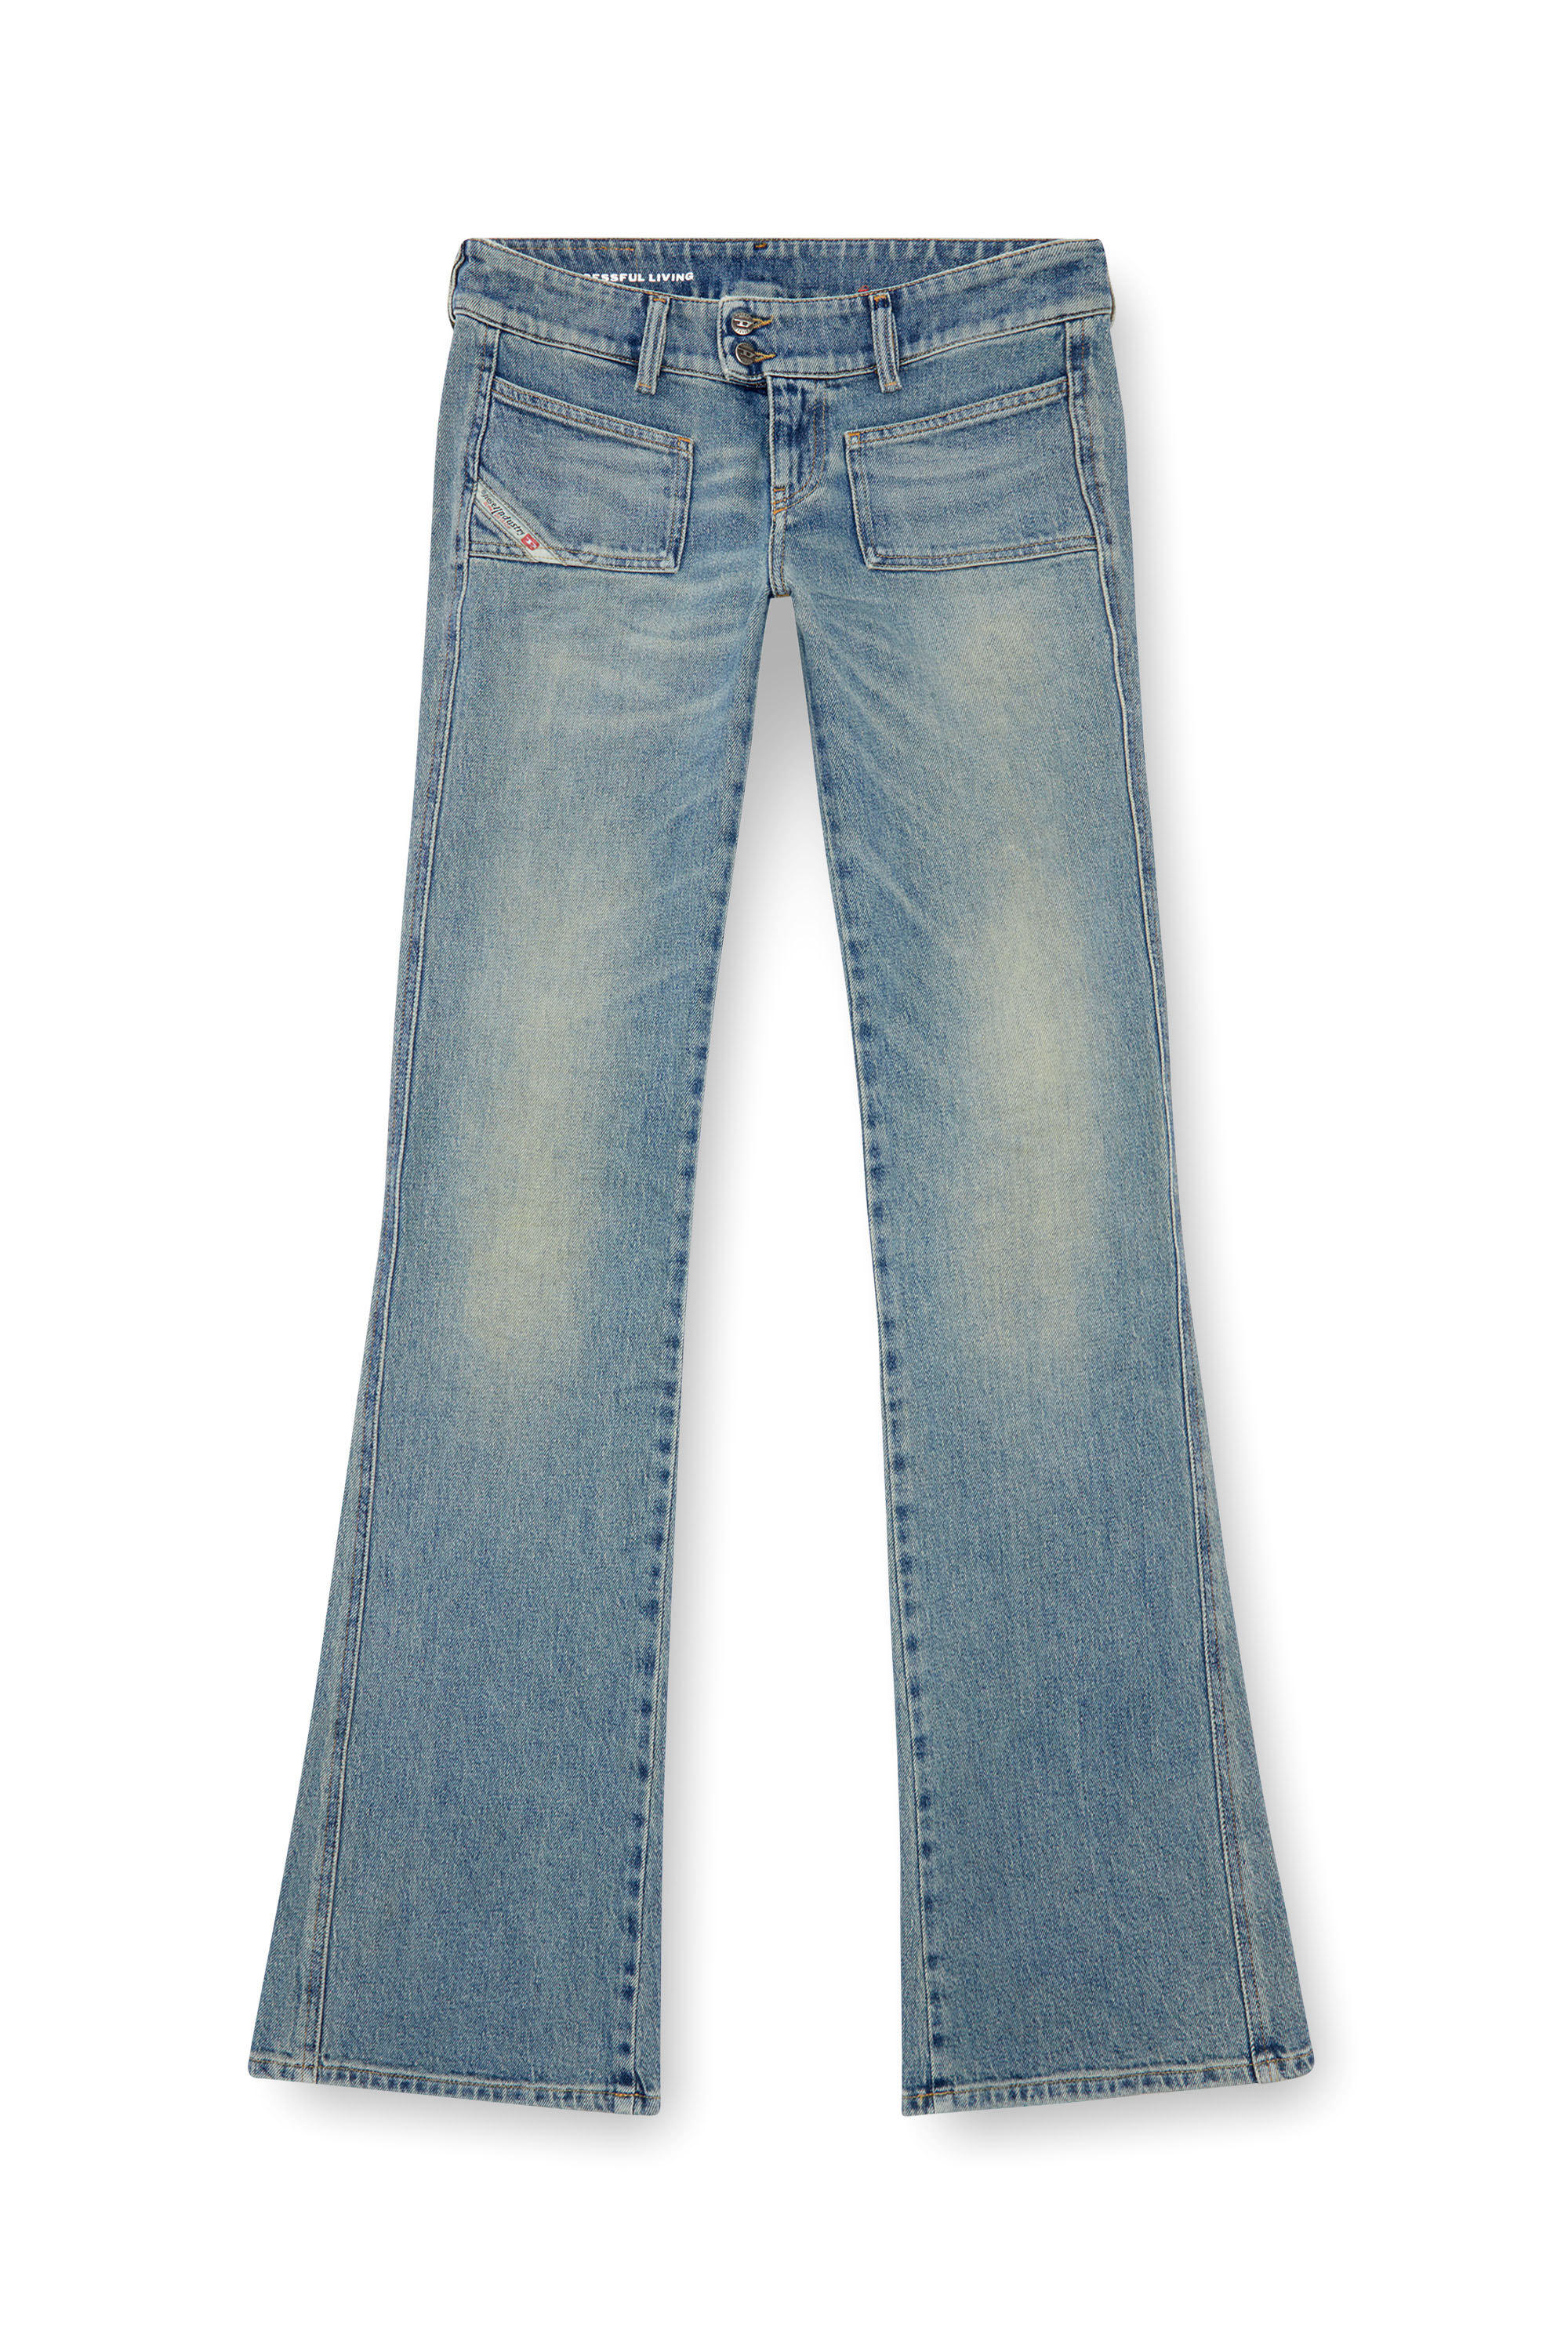 Diesel - Bootcut and Flare Jeans D-Hush 09J55, Mujer Bootcut y Flare Jeans - D-Hush in Azul marino - Image 6